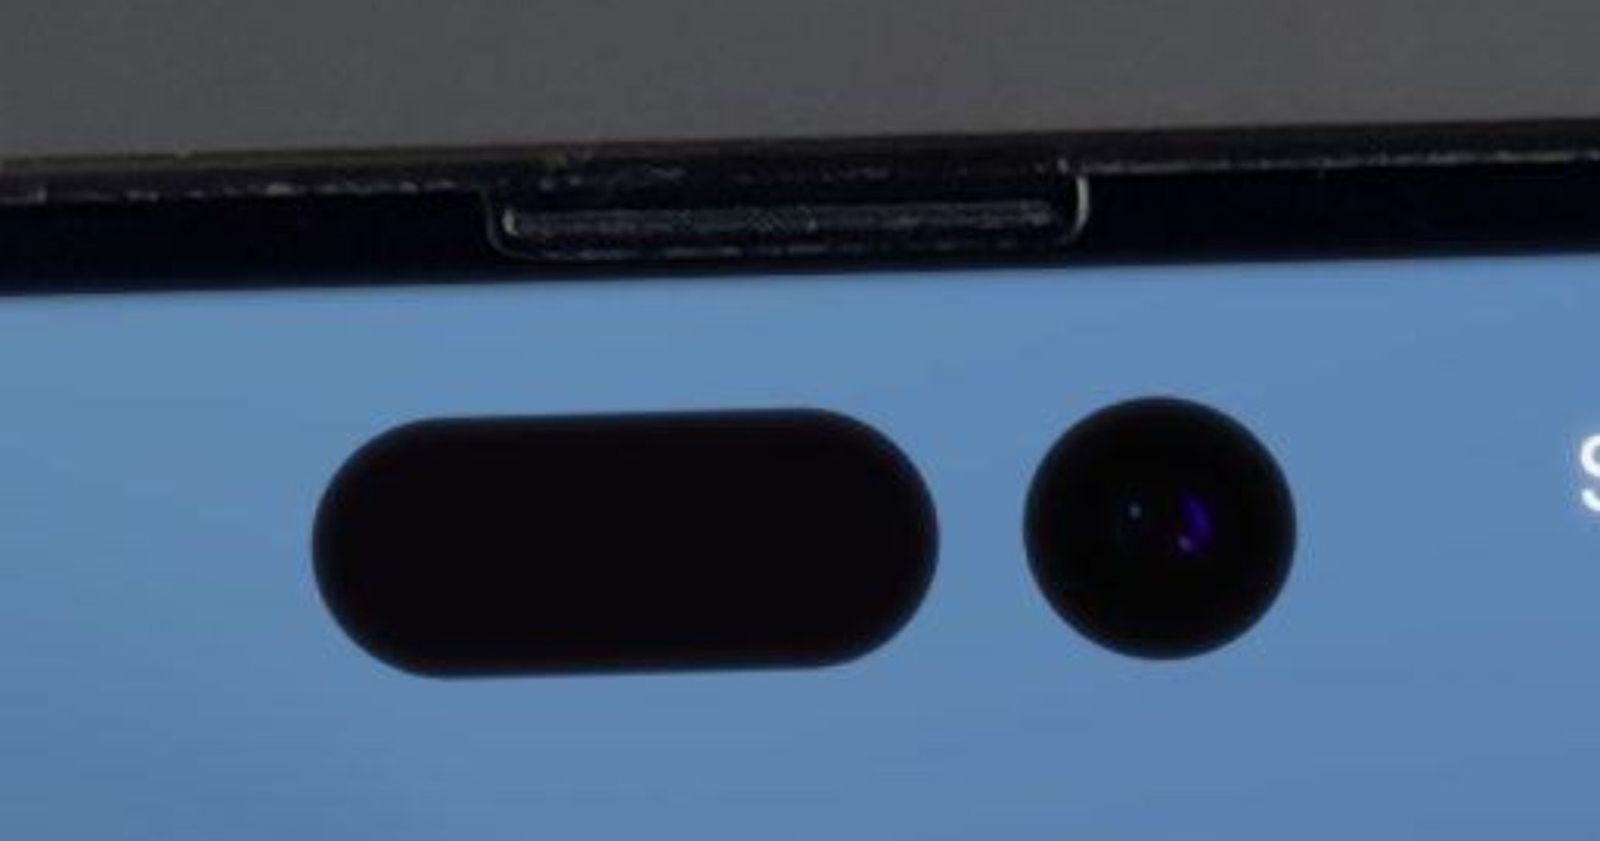 iPhone 14 Pro closeup photo of alleged pill and hole punch shaped cutouts for TrueDepth camera array